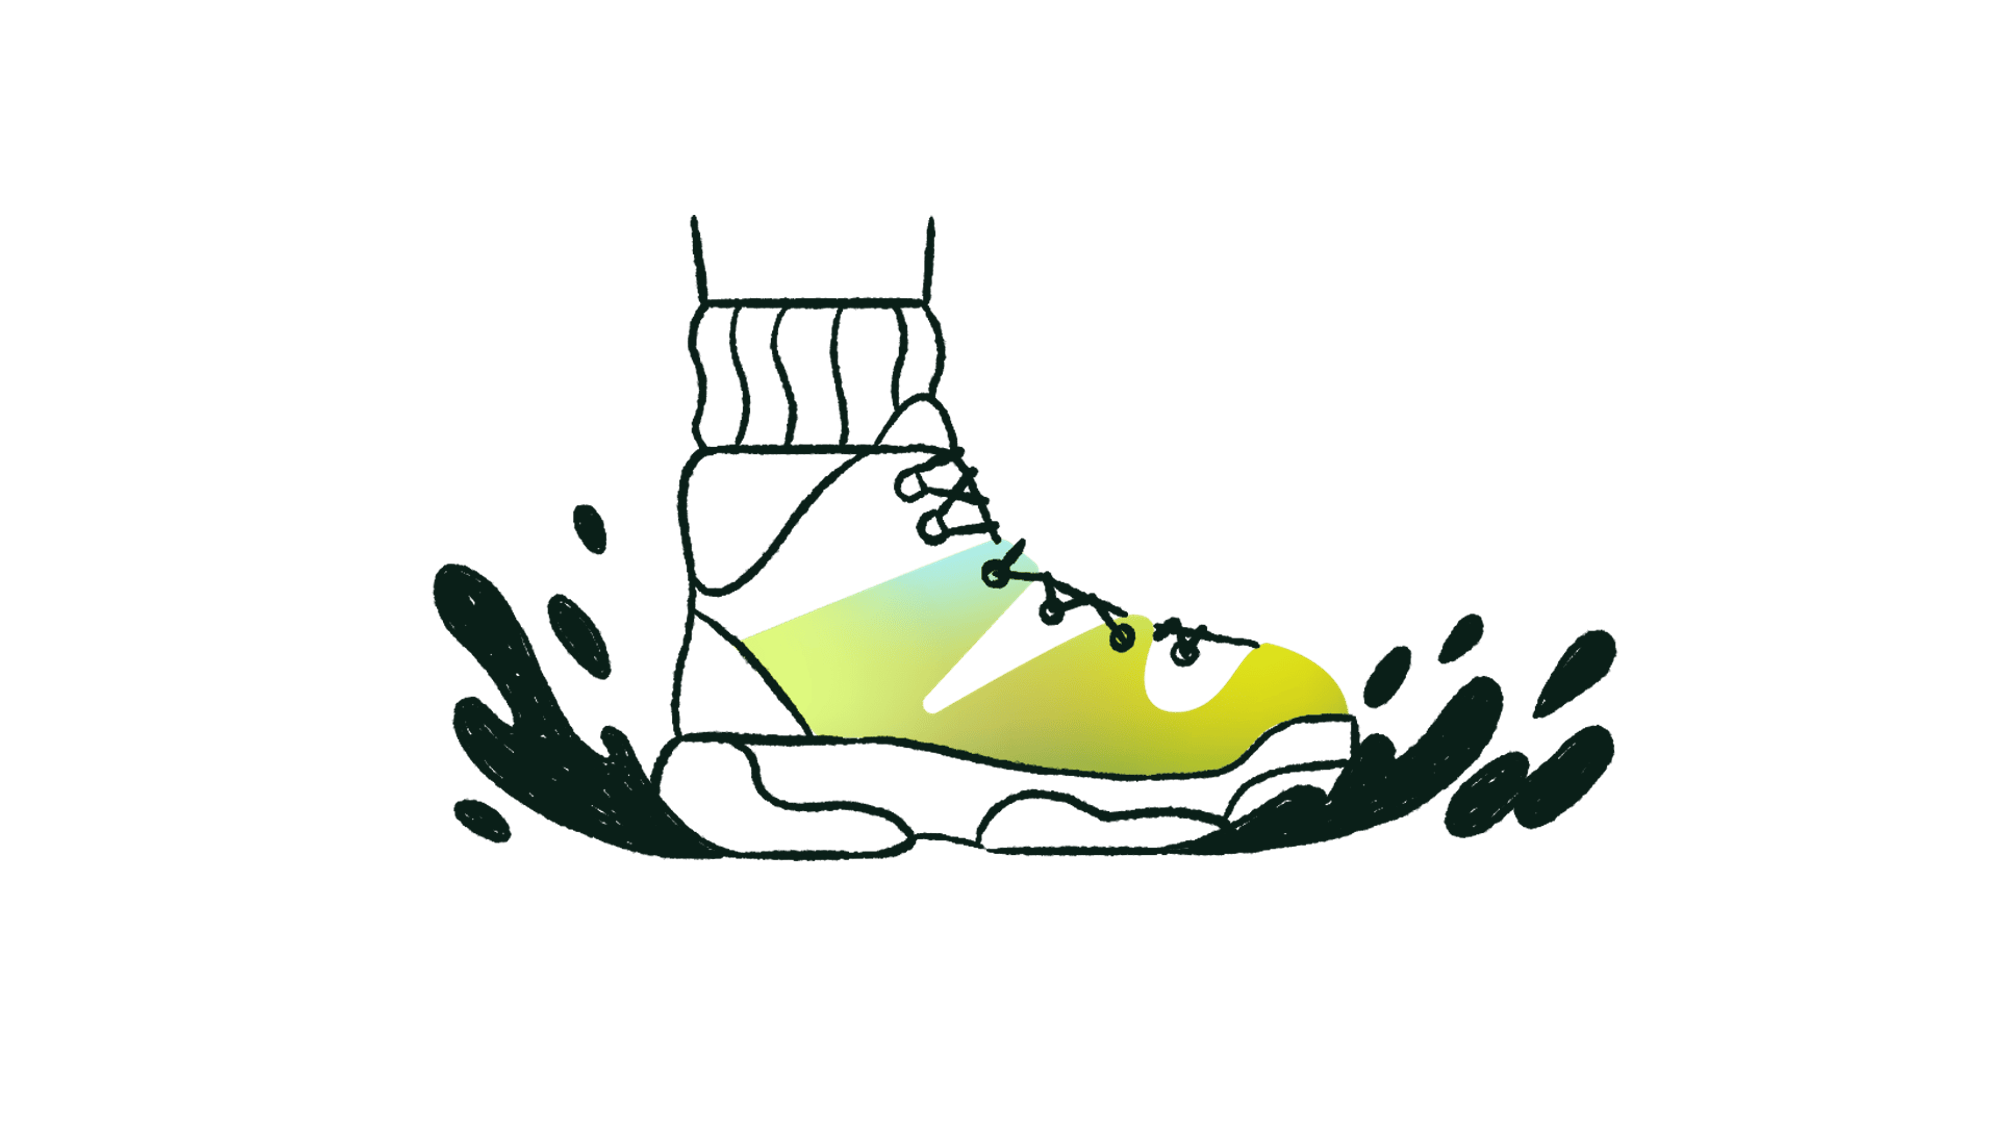 Illustration of a hiking boot that has just burst in the splashing mud.